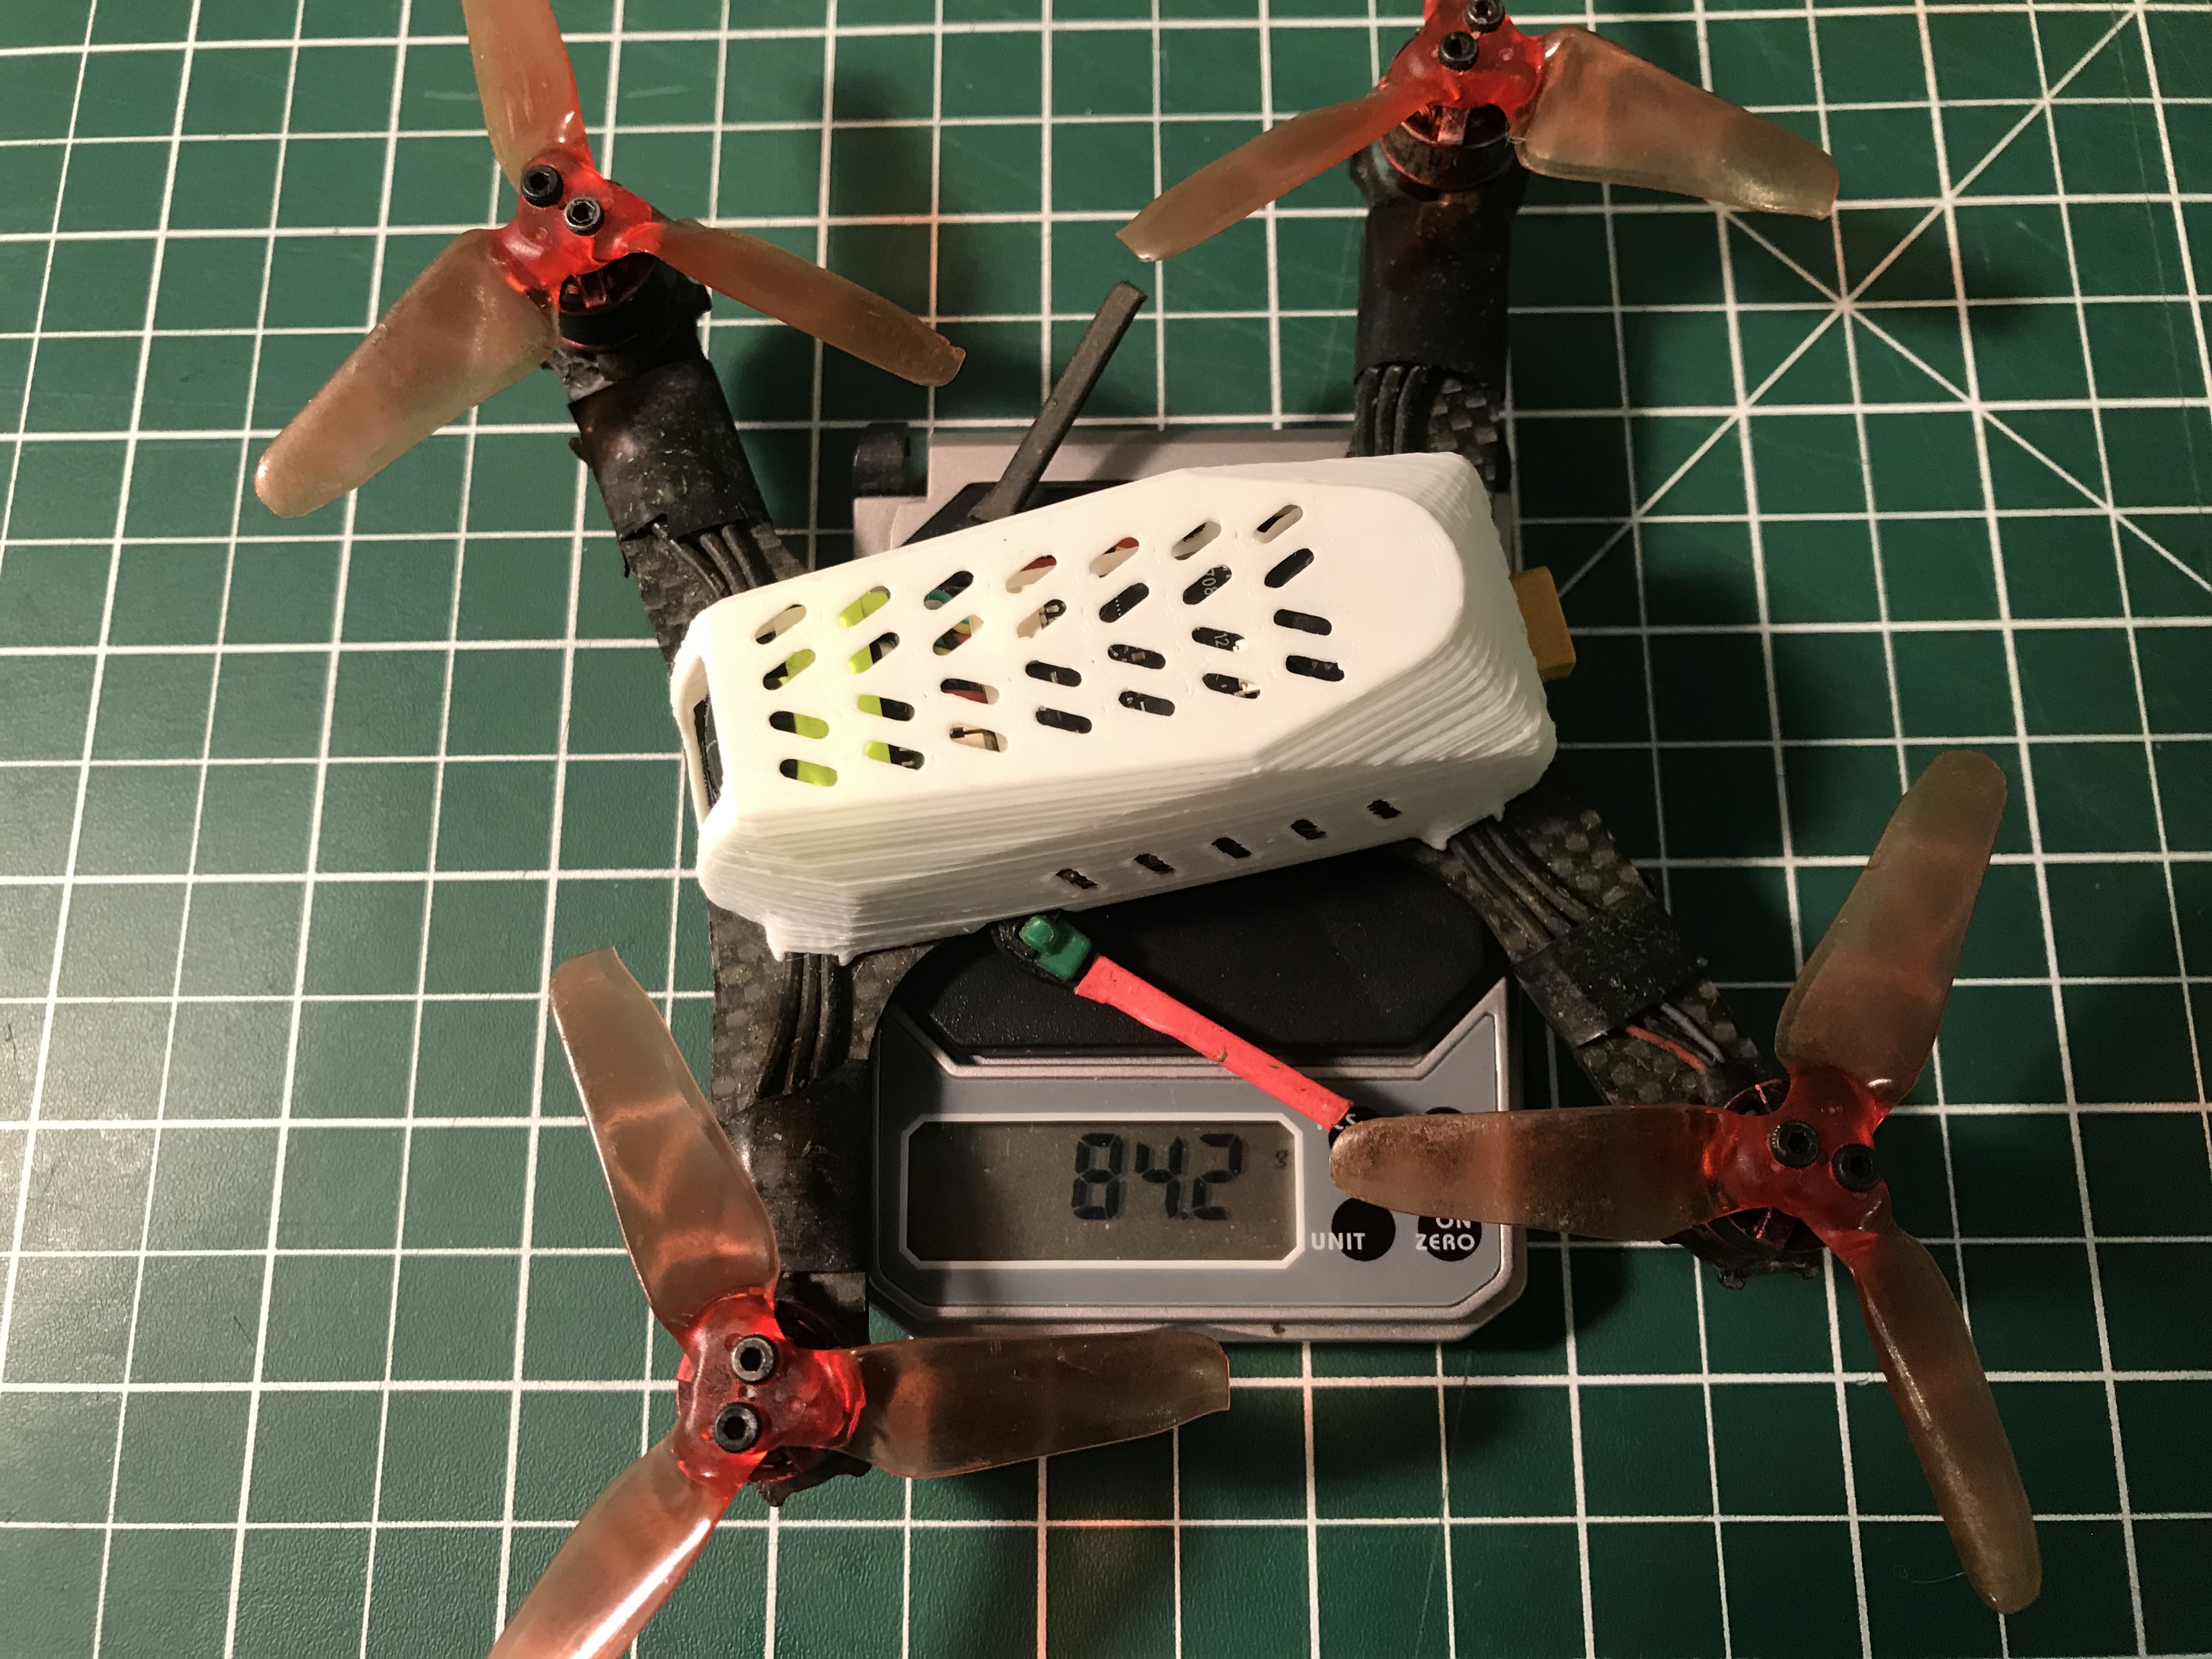 Eachine Racer 130 custom modifications - Dry weight 84.2g